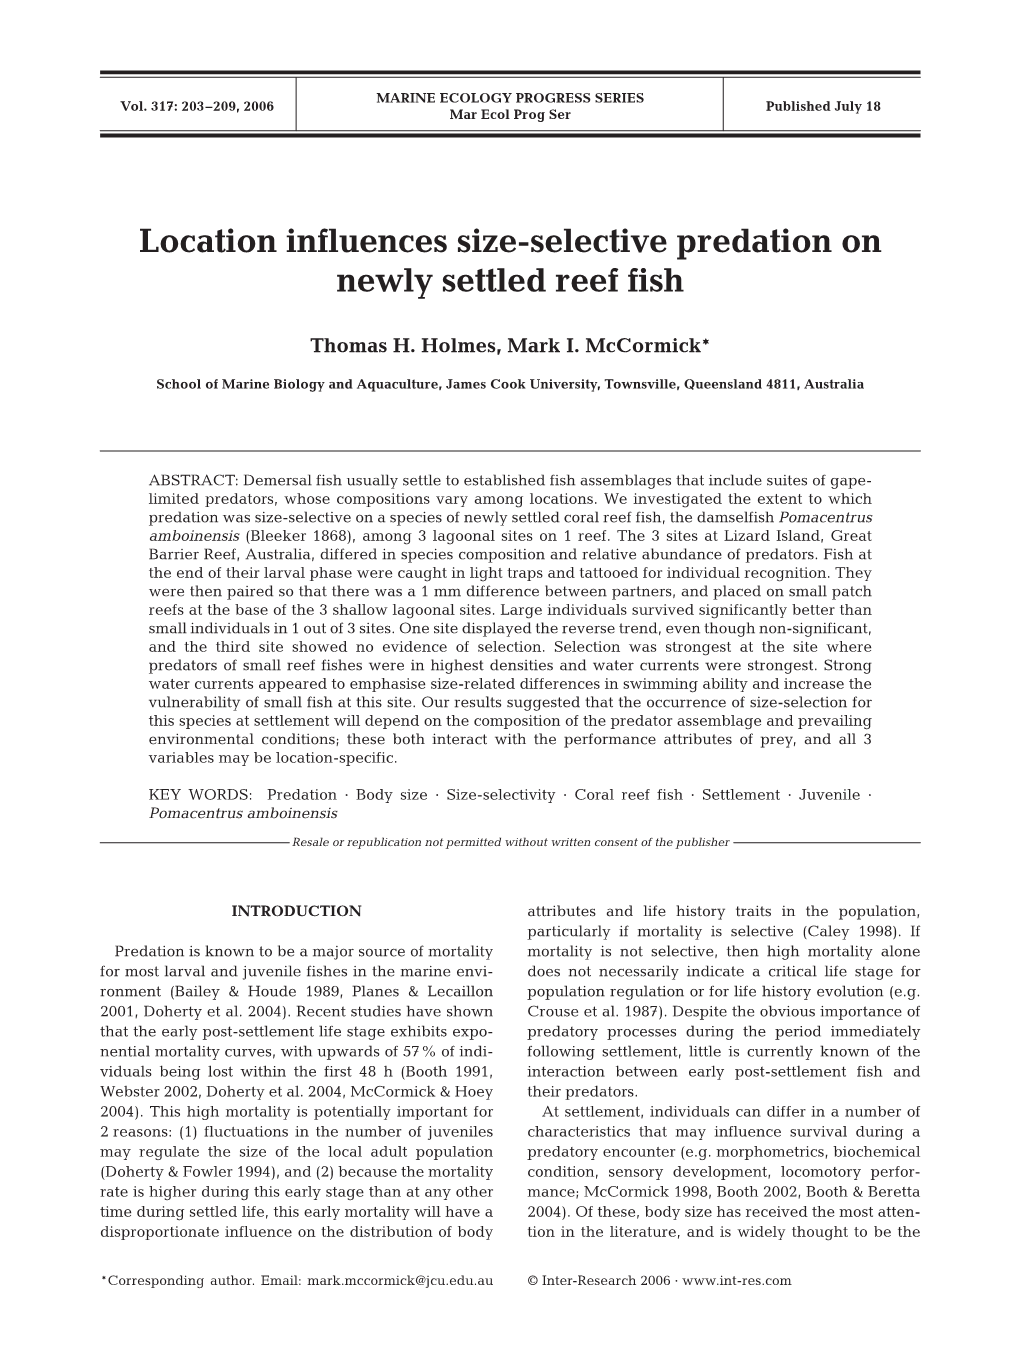 Location Influences Size-Selective Predation on Newly Settled Reef Fish